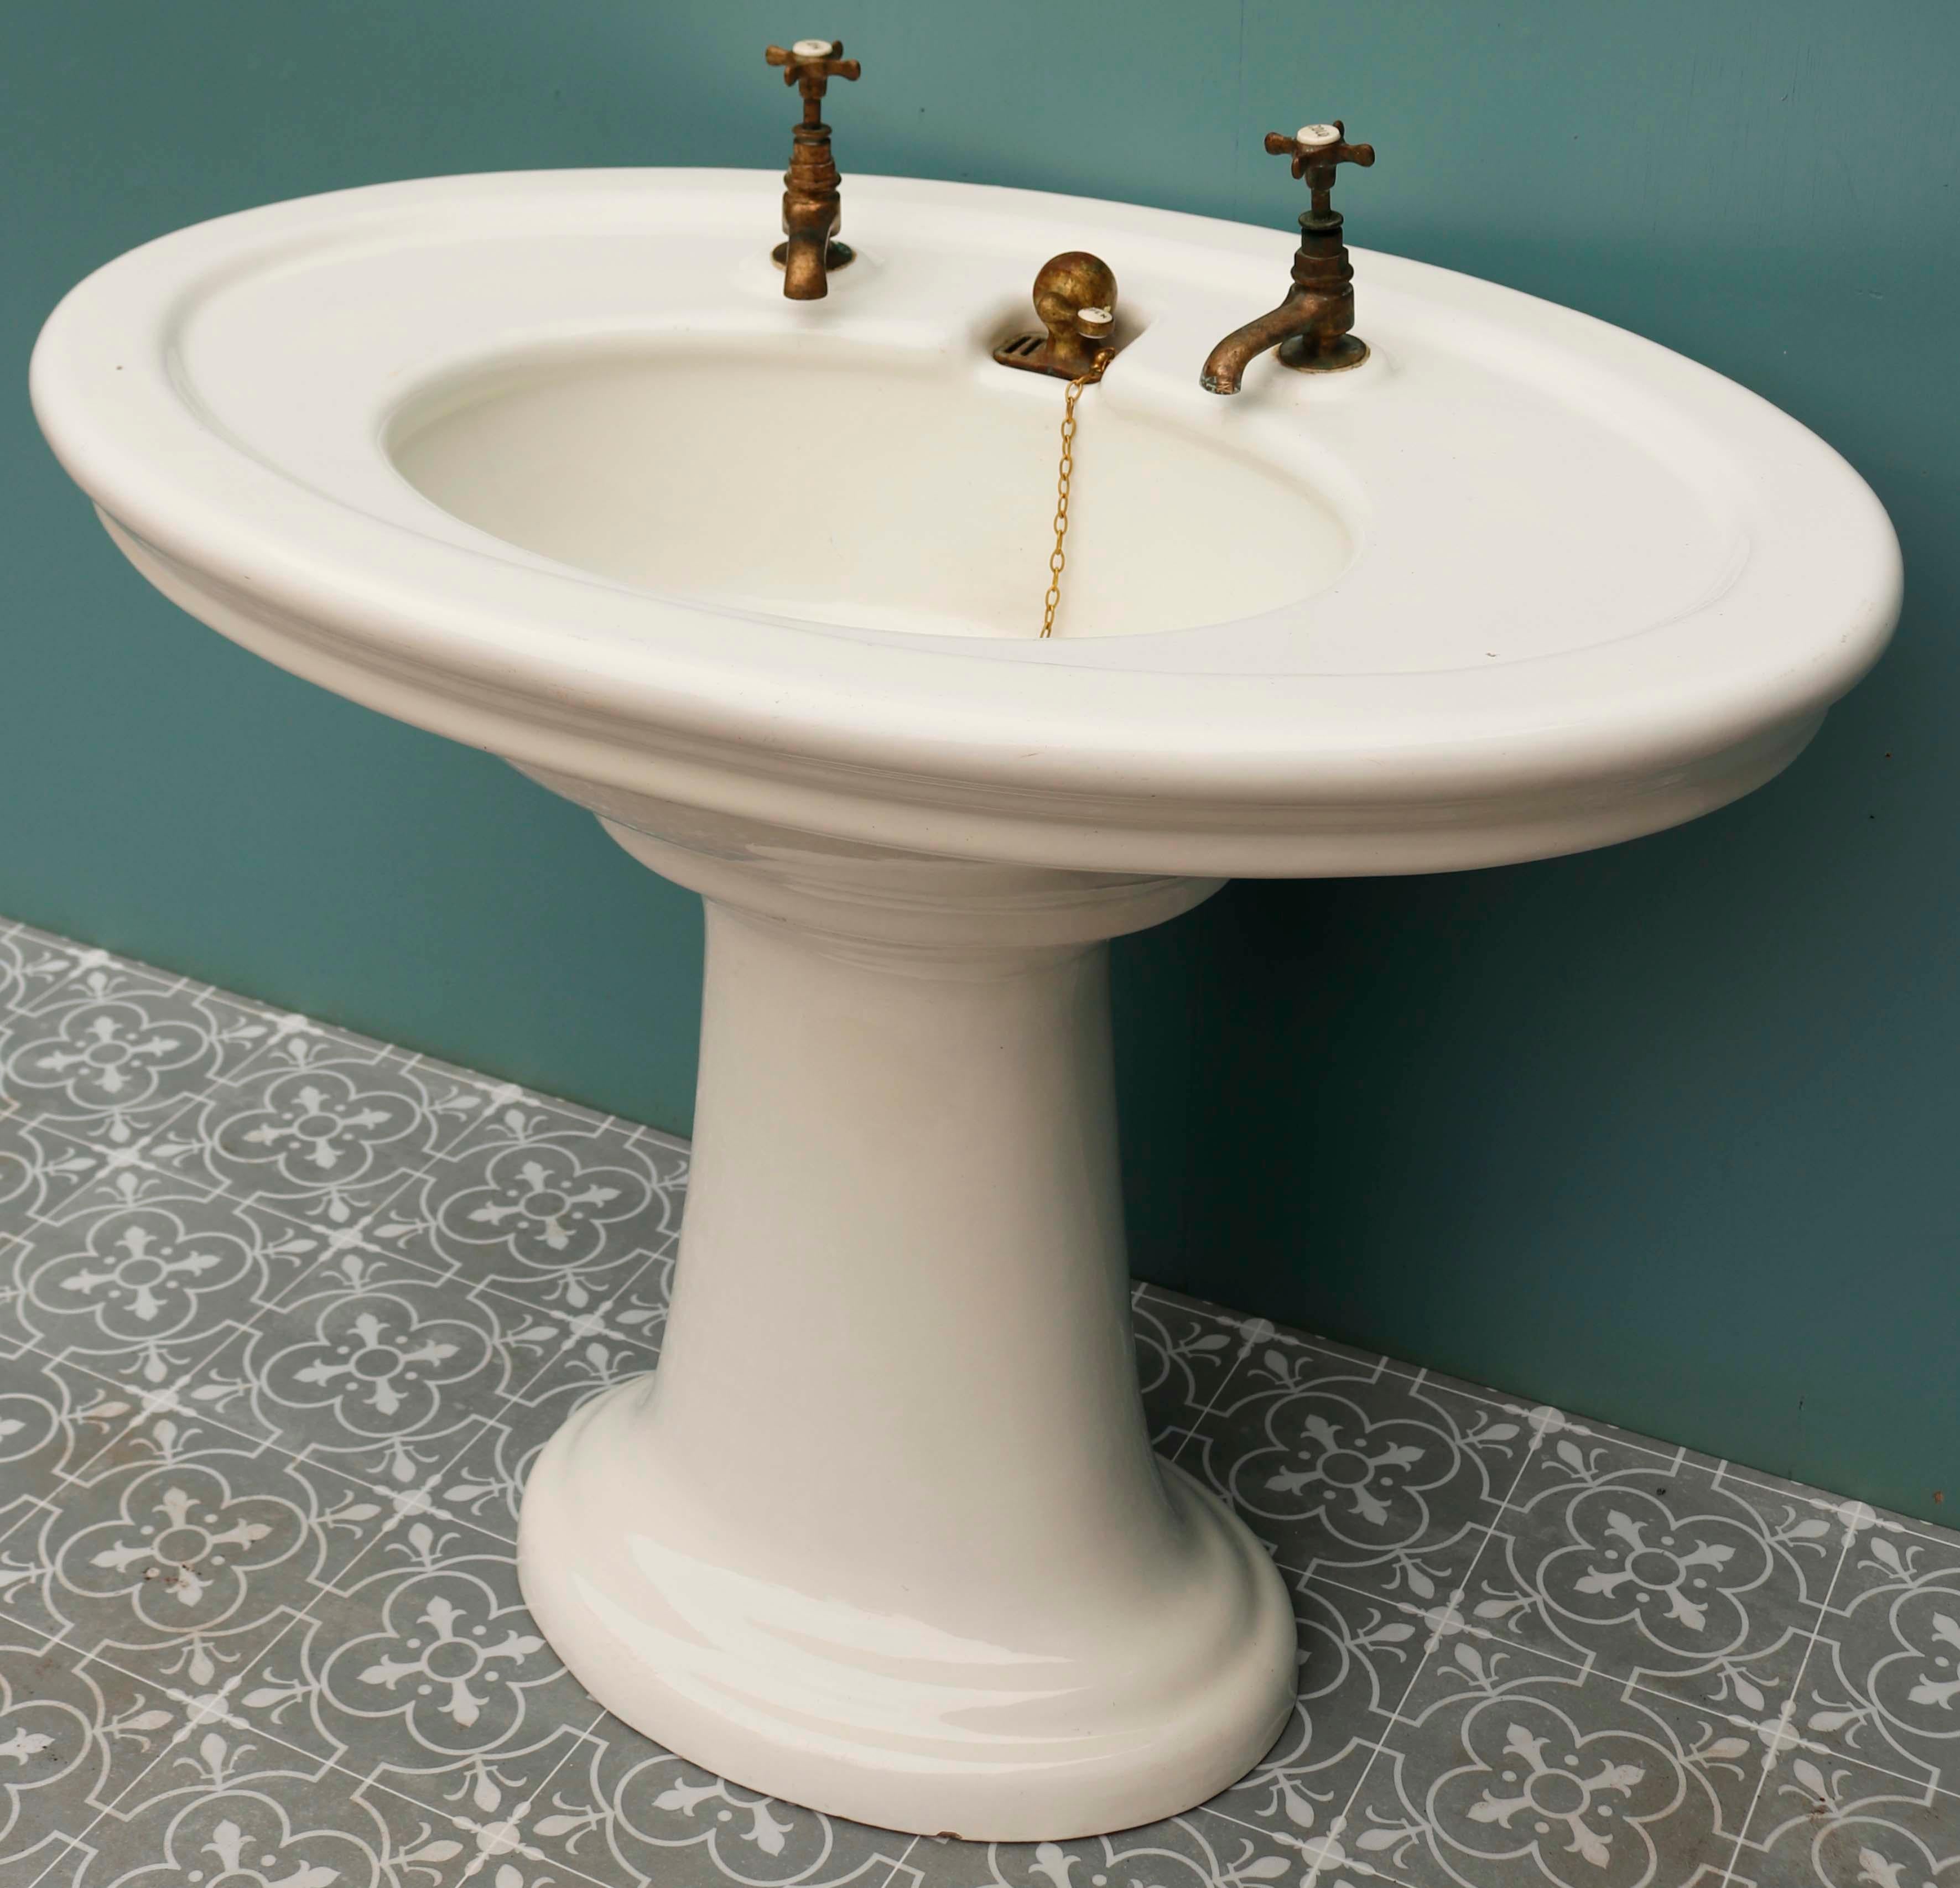 20th Century Antique Oval Shaped Pedestal Sink